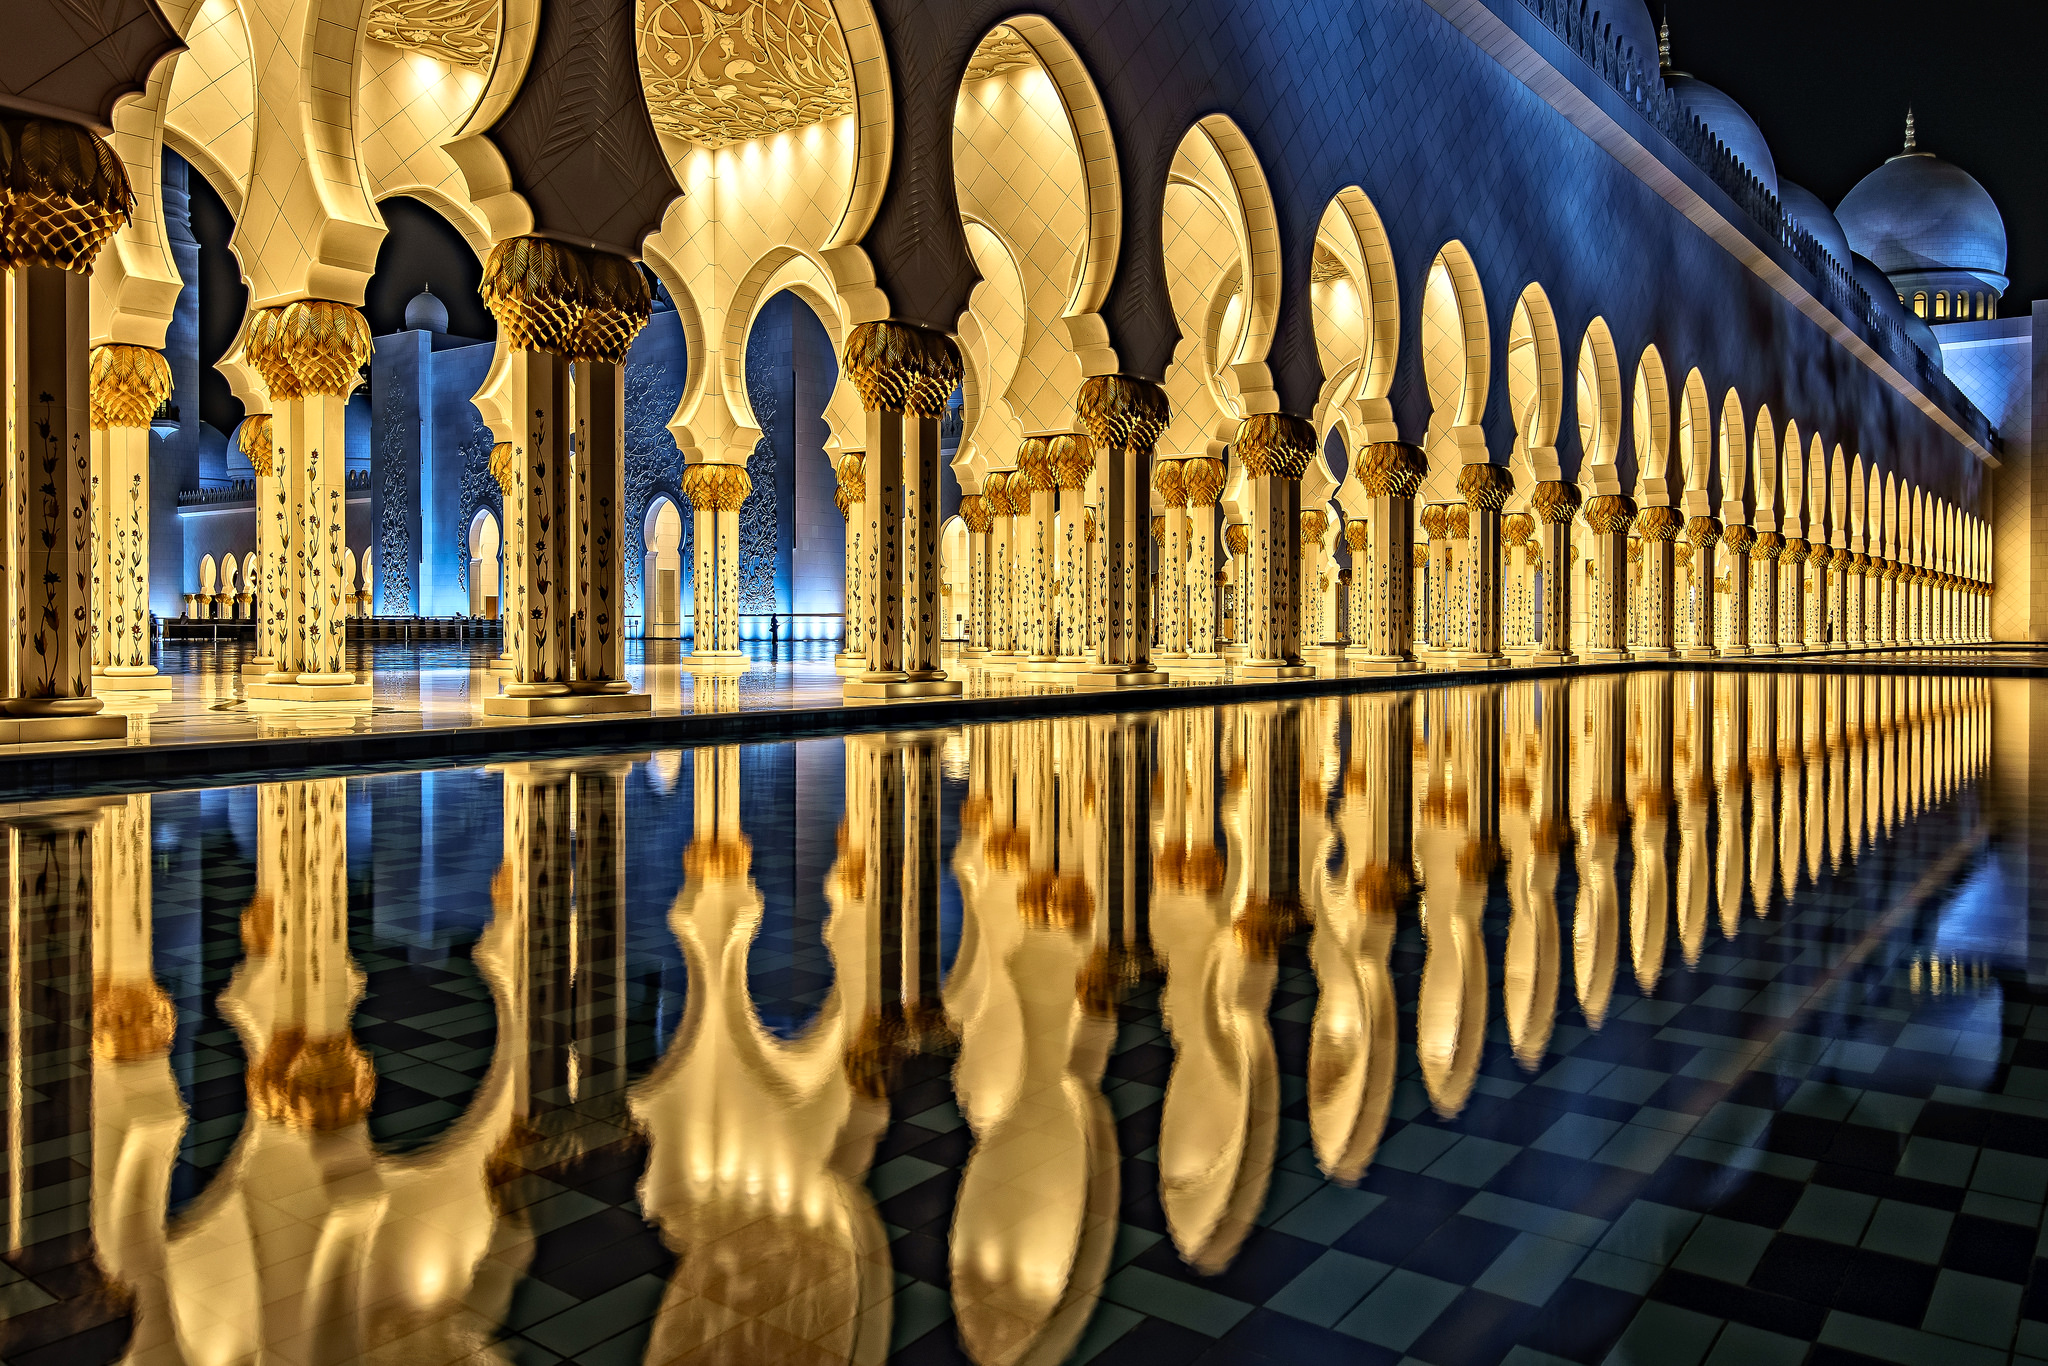 religious, sheikh zayed grand mosque, abu dhabi, architecture, light, mosque, night, reflection, mosques HD for desktop 1080p